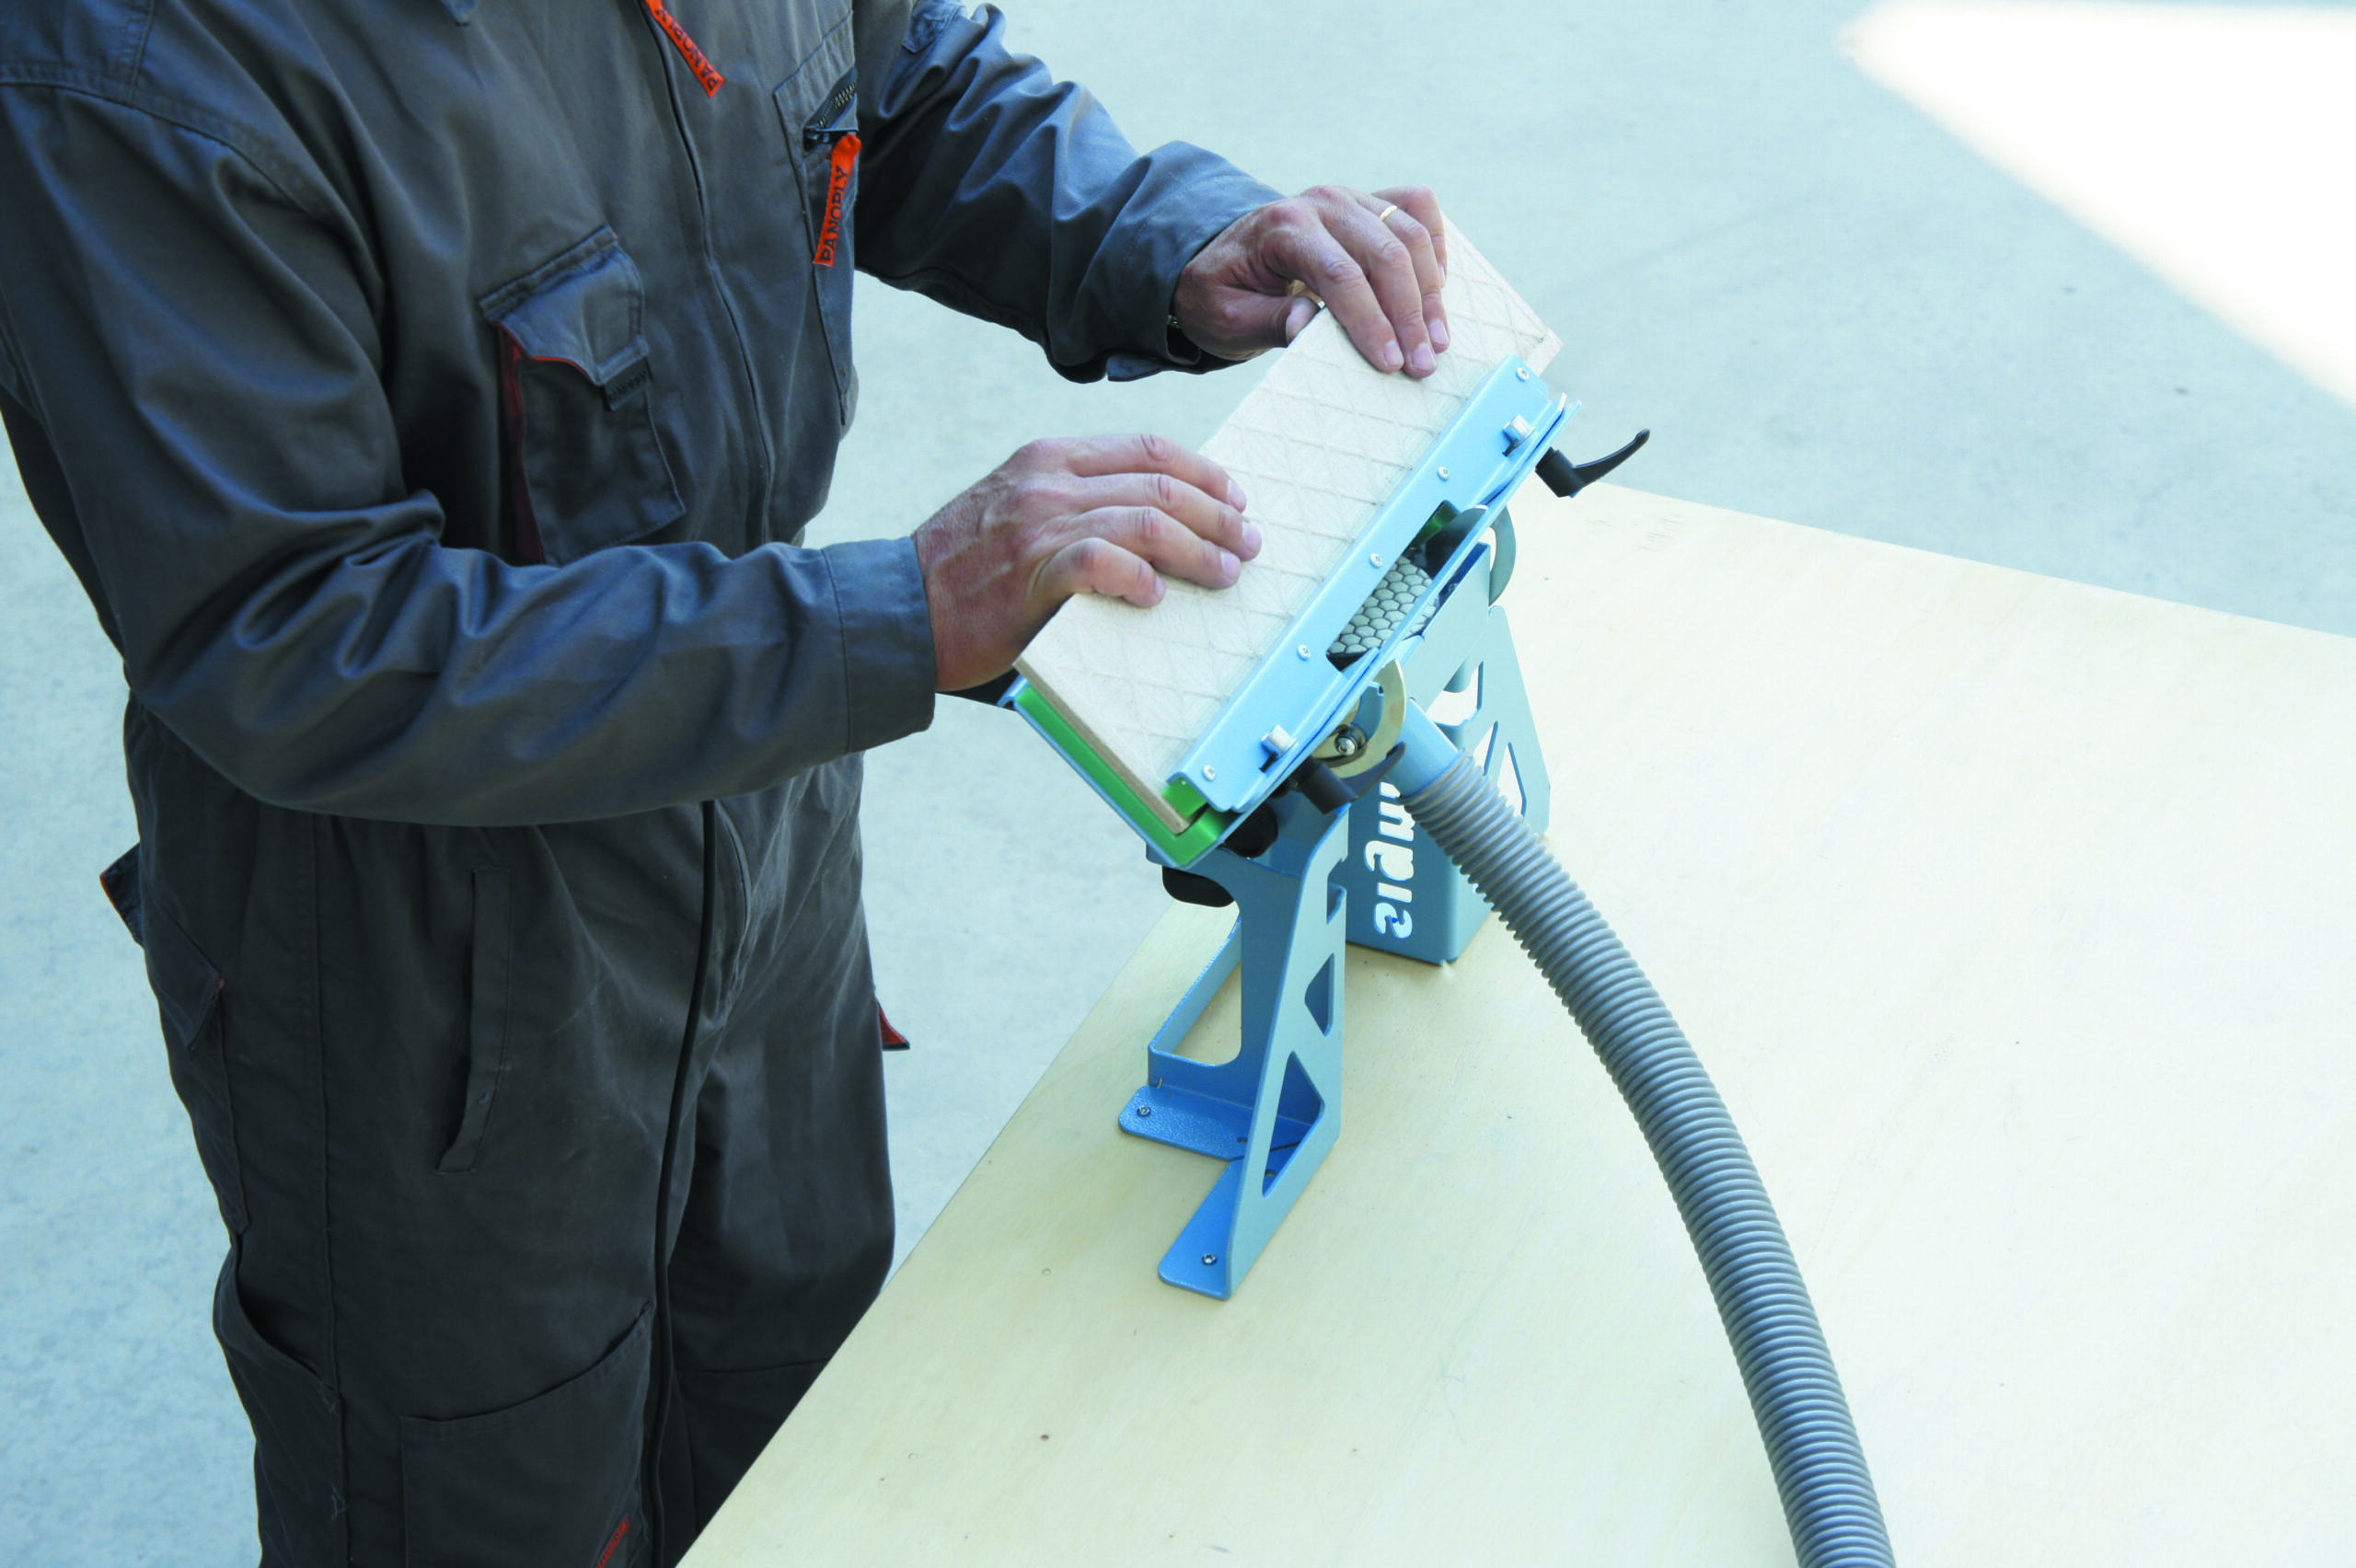 Sigma® Edging Tools for mitering edges on Tile.